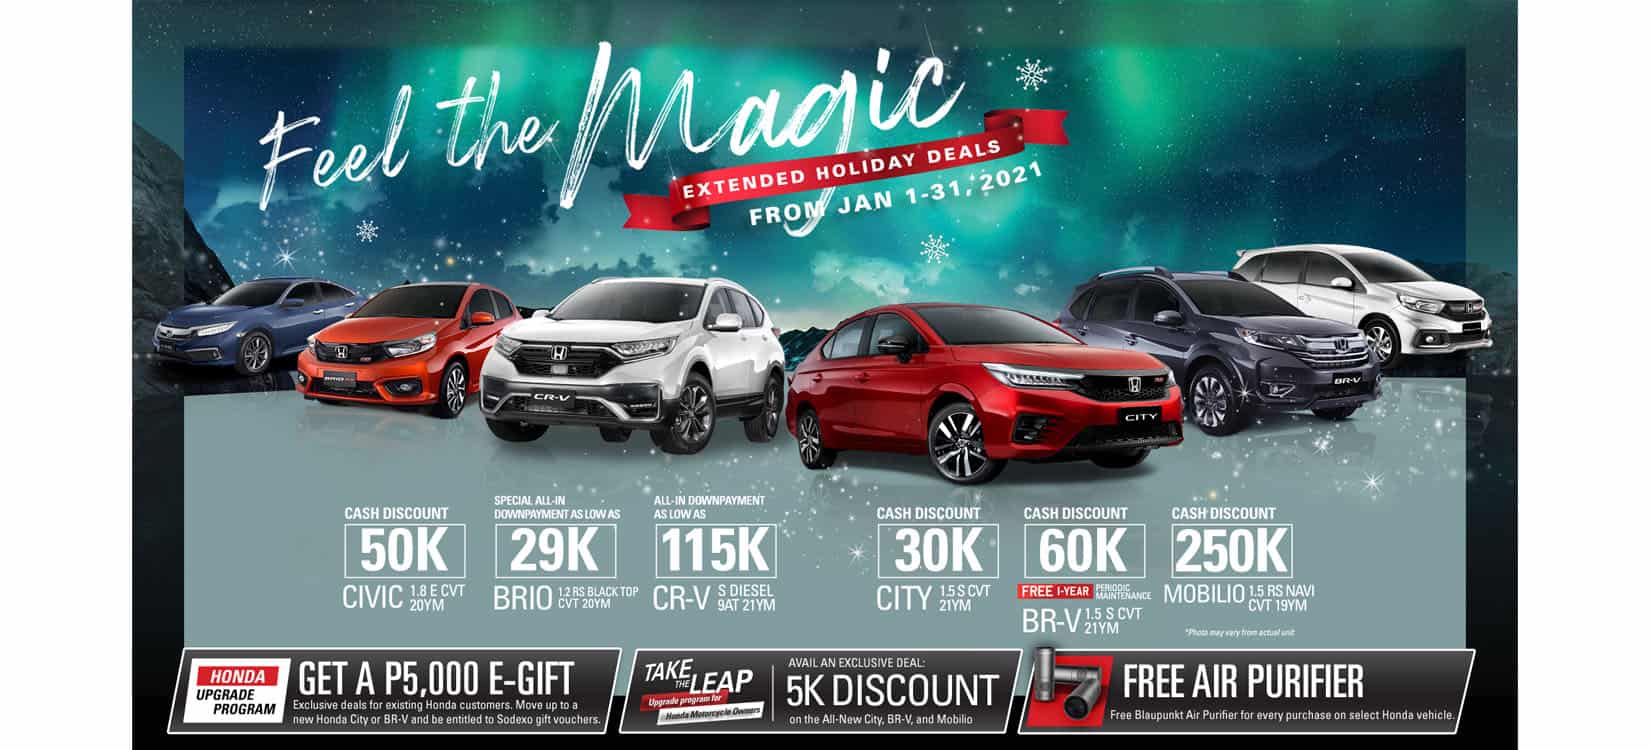 Honda extends the holidays with new promos this January